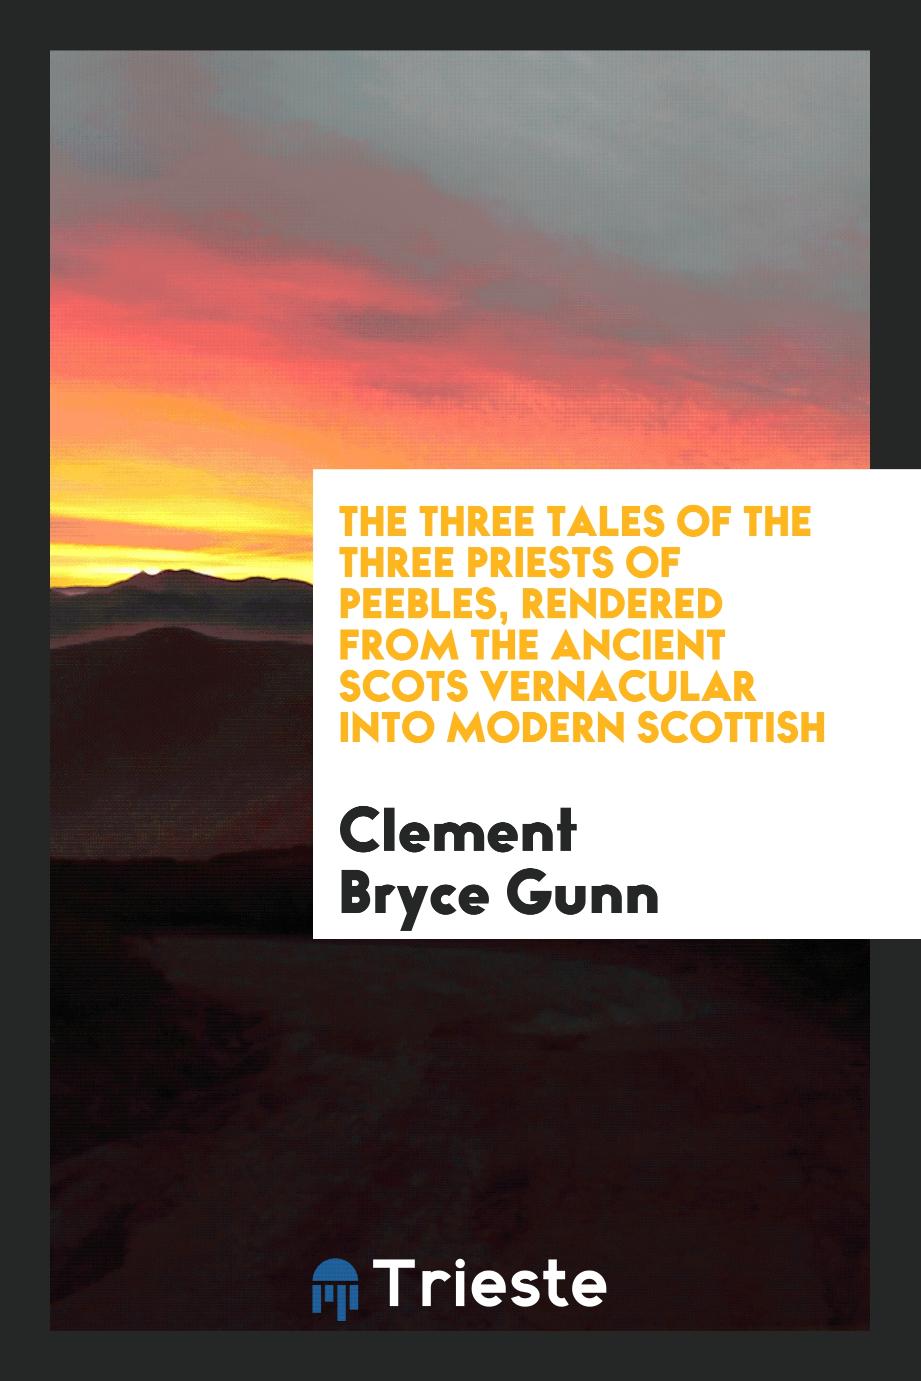 The Three Tales of the Three Priests of Peebles, Rendered from the Ancient Scots Vernacular into Modern Scottish